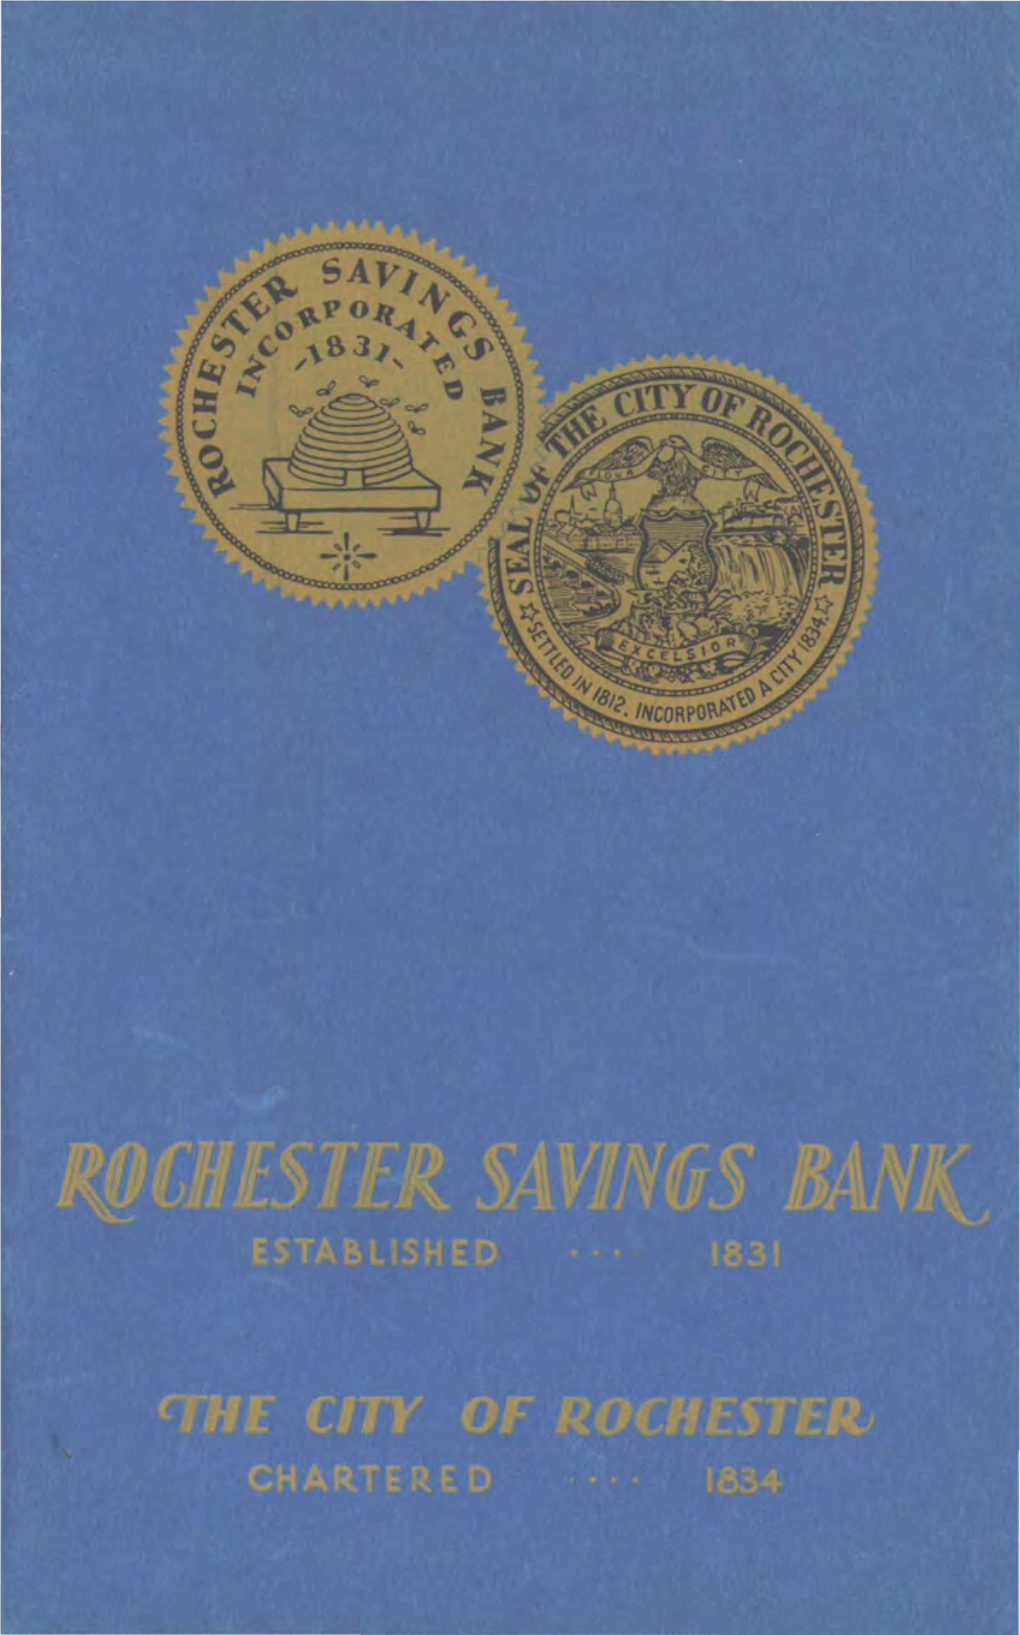 A Pioneer Mutual Savings Bank the Rochester SAVINGS BANK Is the Oldest Bank in the City of Rochester